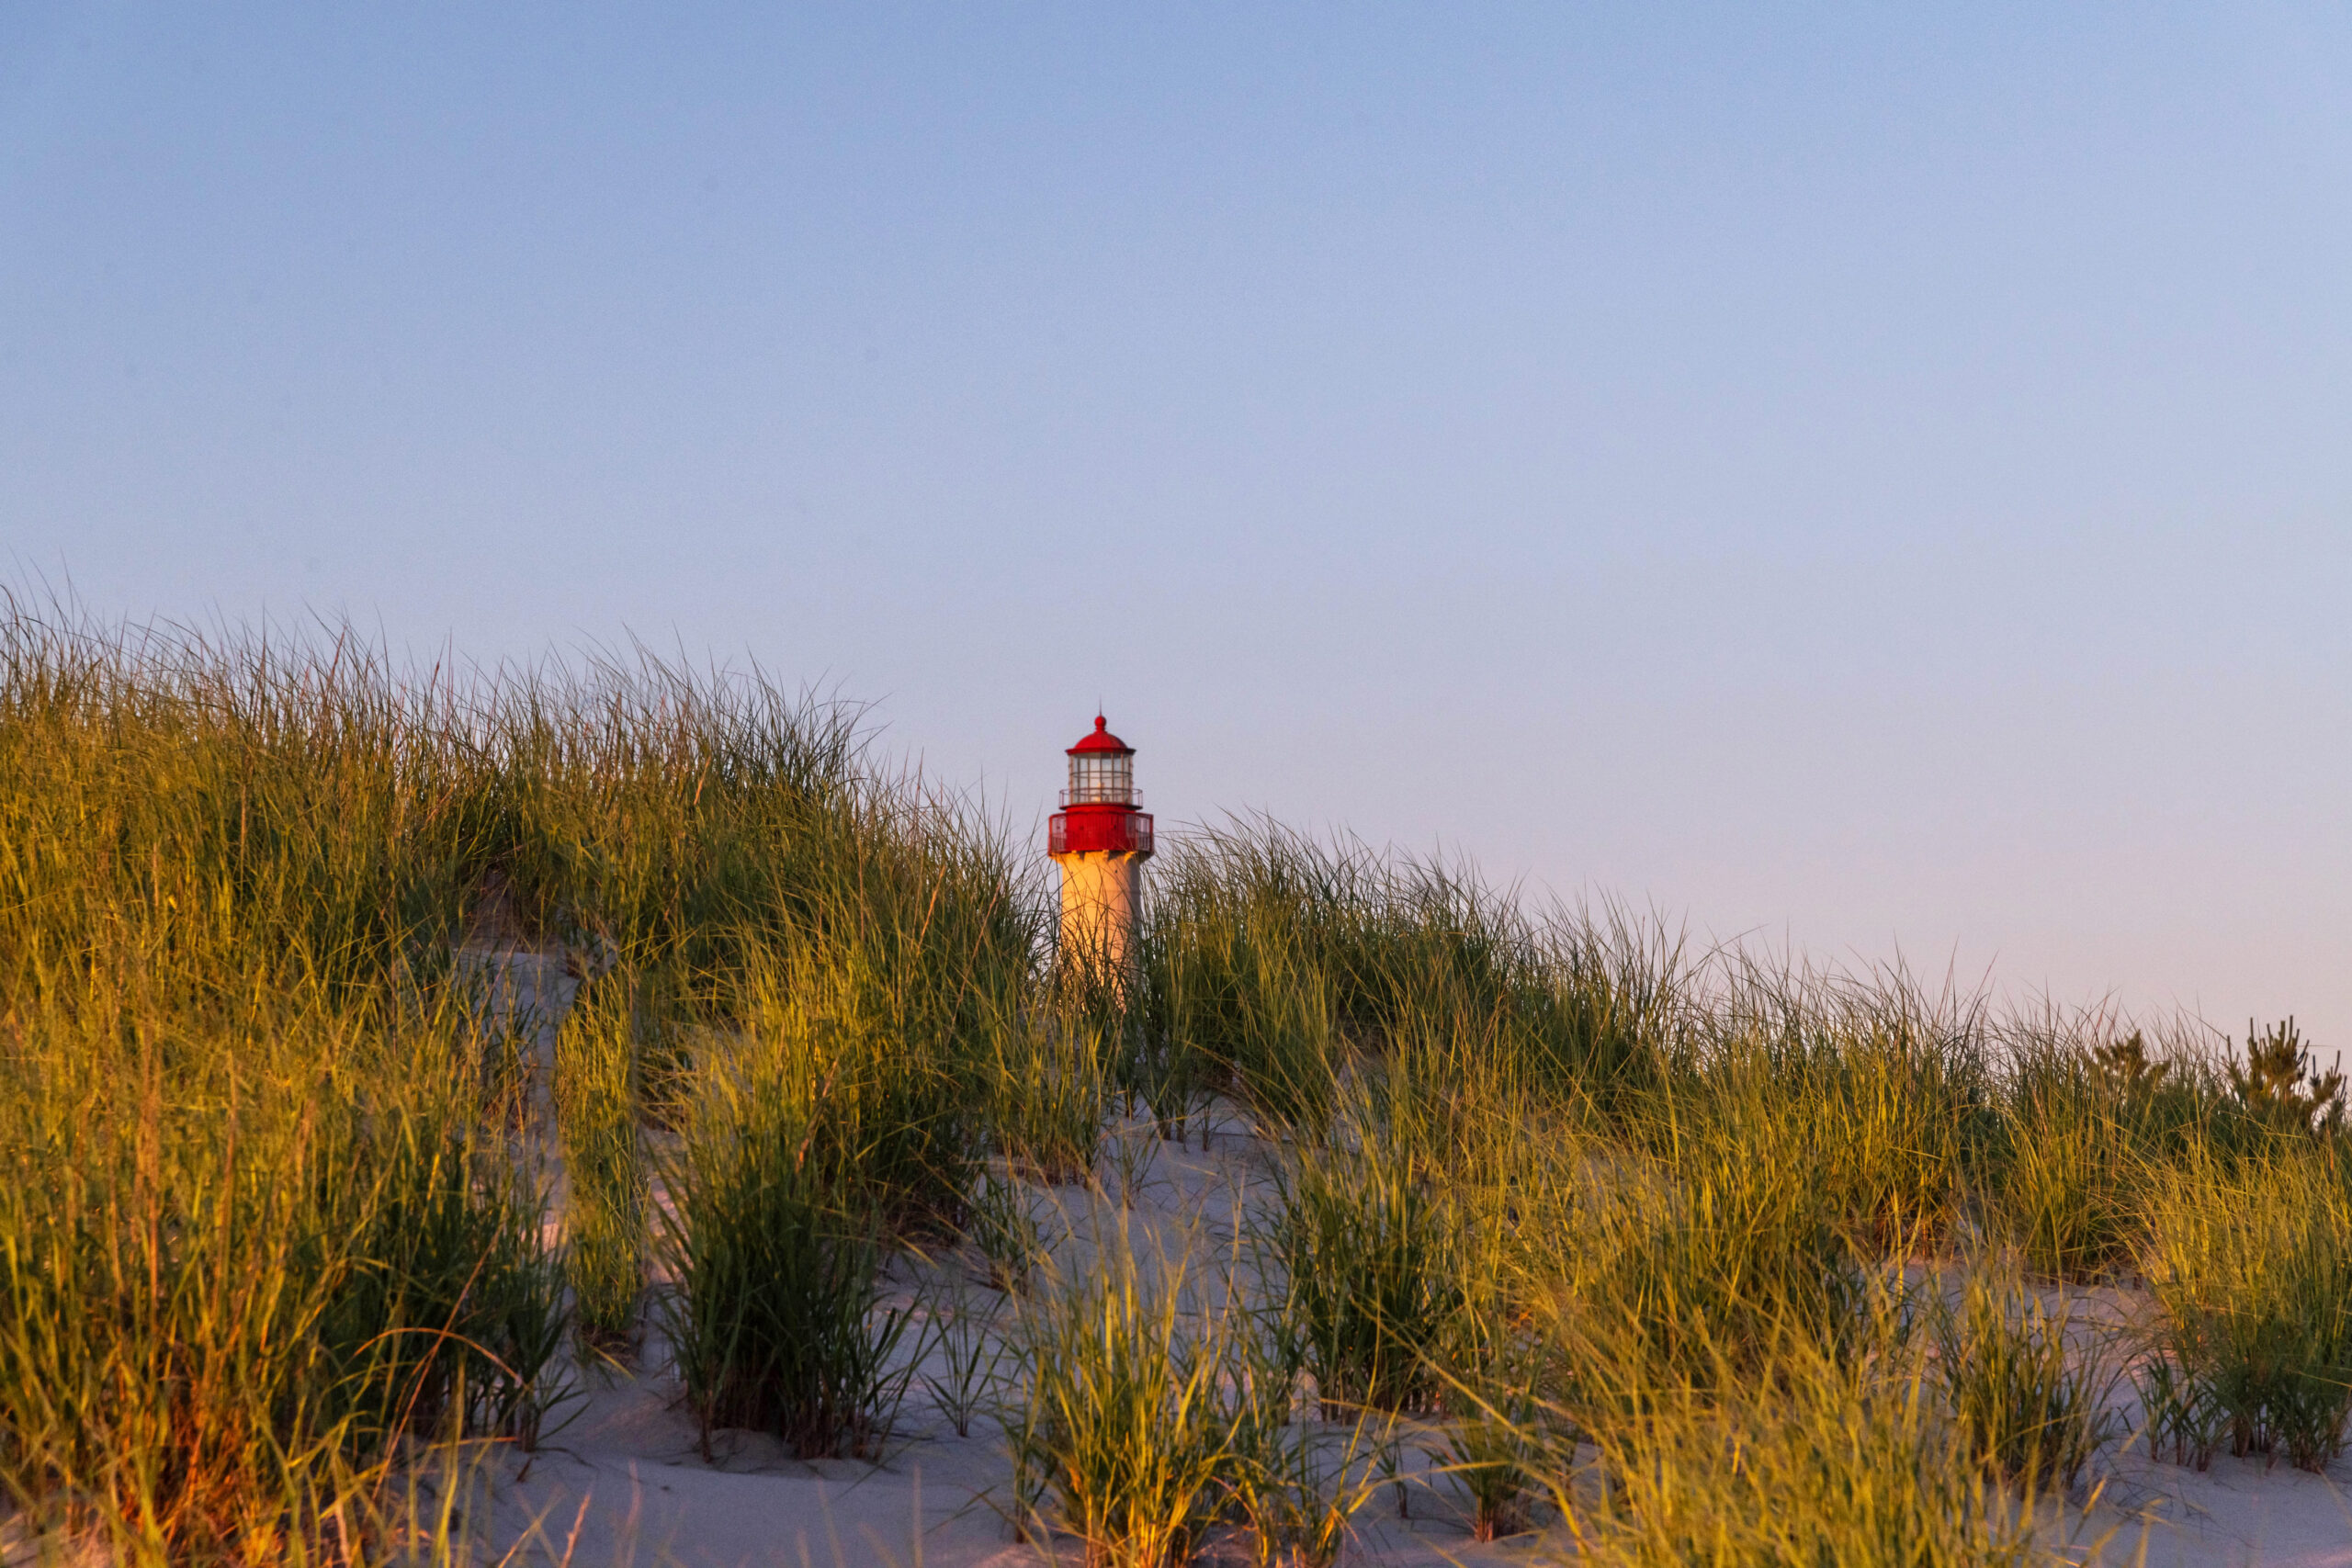 The Cape May Lighthouse behind green beach dunes. There is a clear blue sky, and sunlight is shining on the dunes and lighthouse.